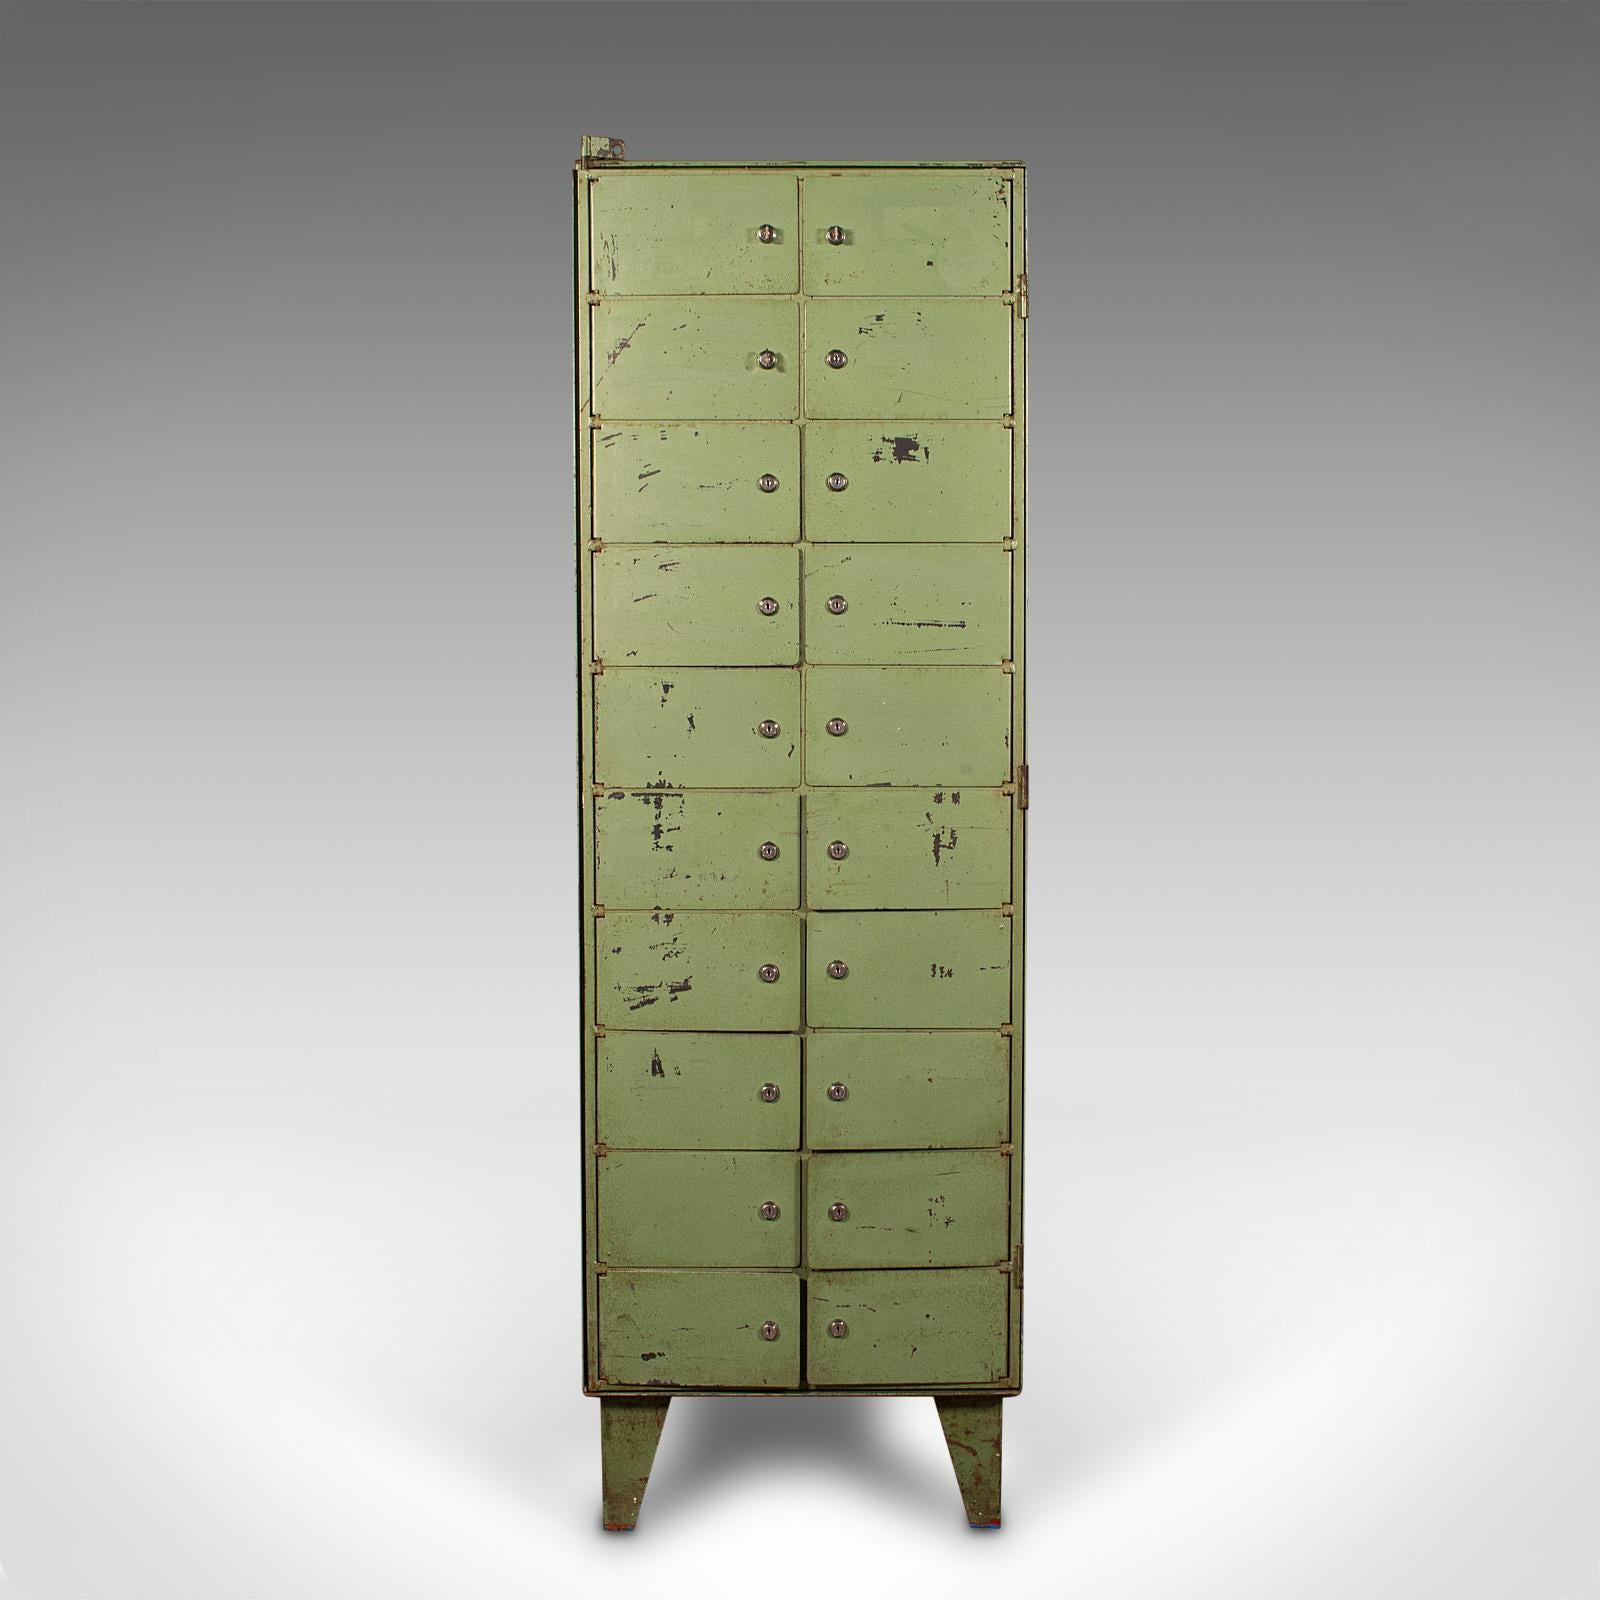 This is a tall vintage bank of pigeon holes. A German, steel 20 door slope front industrial machinist's cabinet, dating to the mid 20th century, circa 1950.

Fascinating Continental pigeon holes, with a weathered appearance
Displaying a desirable